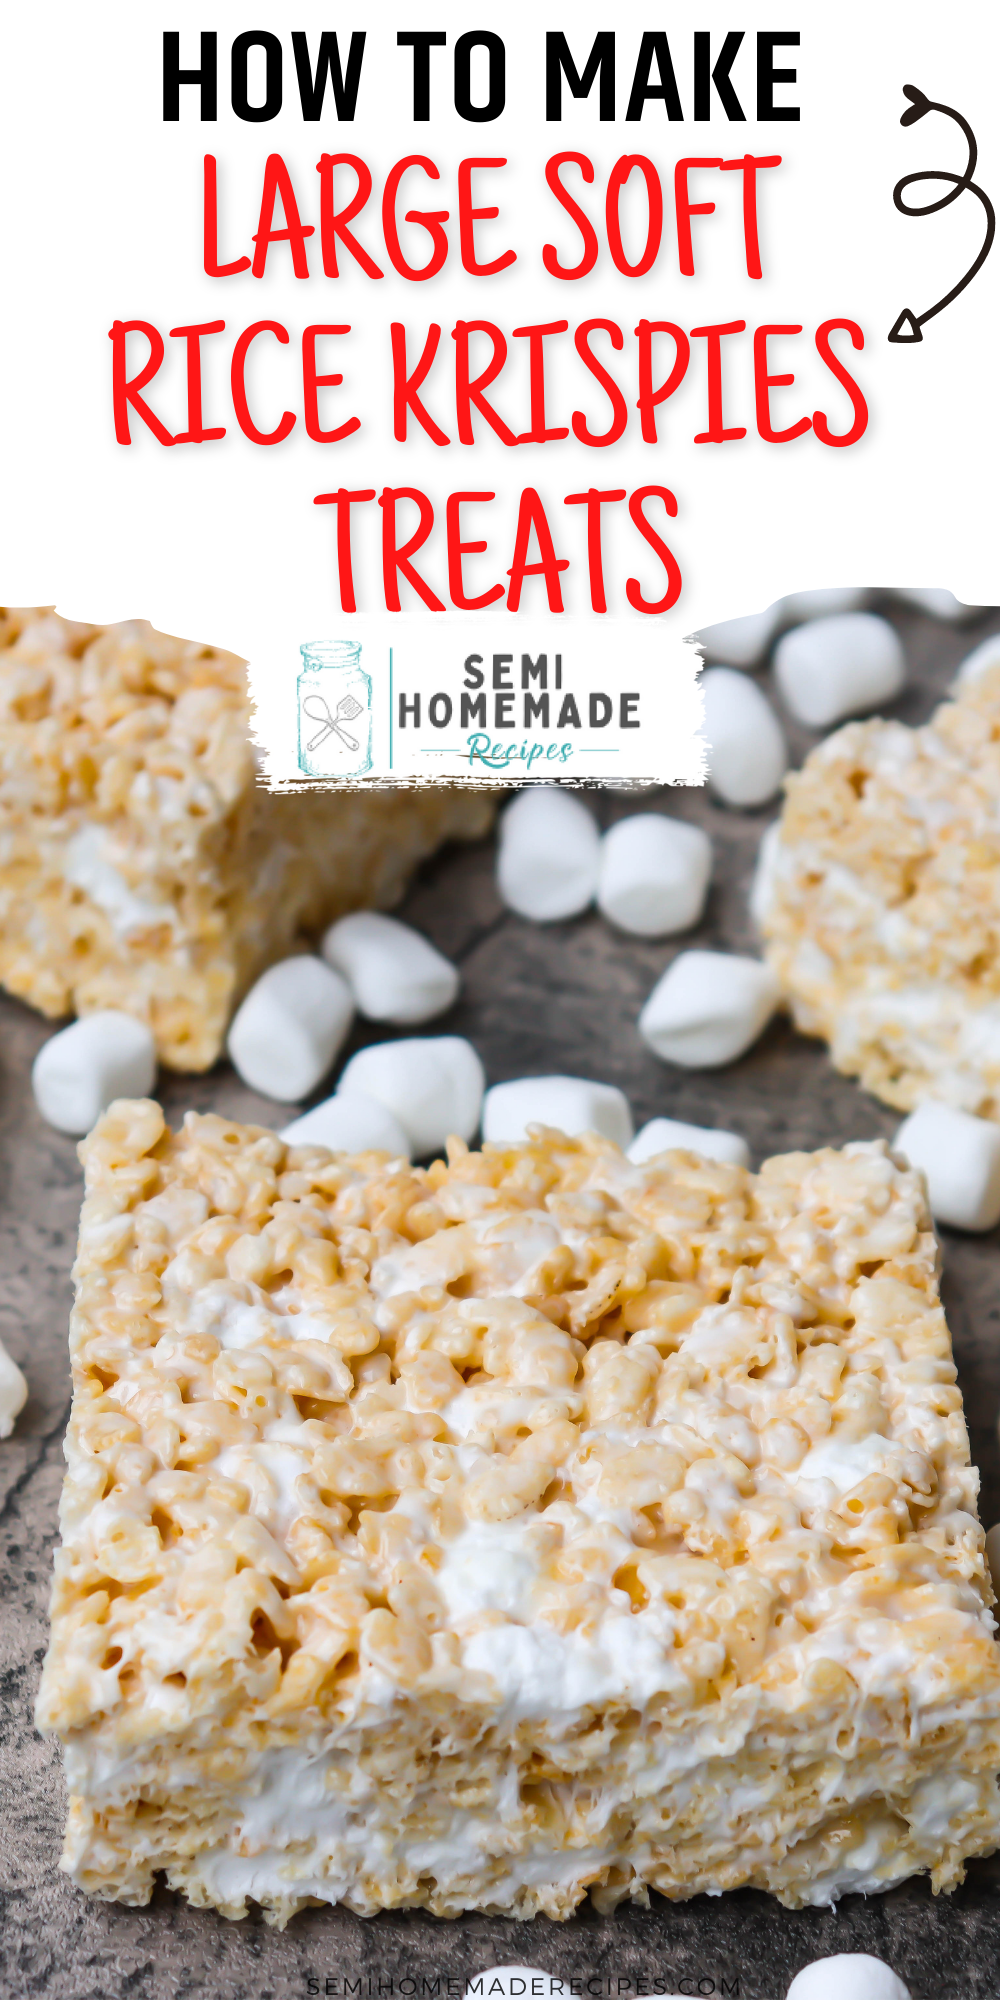 These Large Soft Rice Krispies Treats are absolutely perfect and so easy to make! These homemade Rice Krispies Treats are super soft and full of extra marshmallows. 